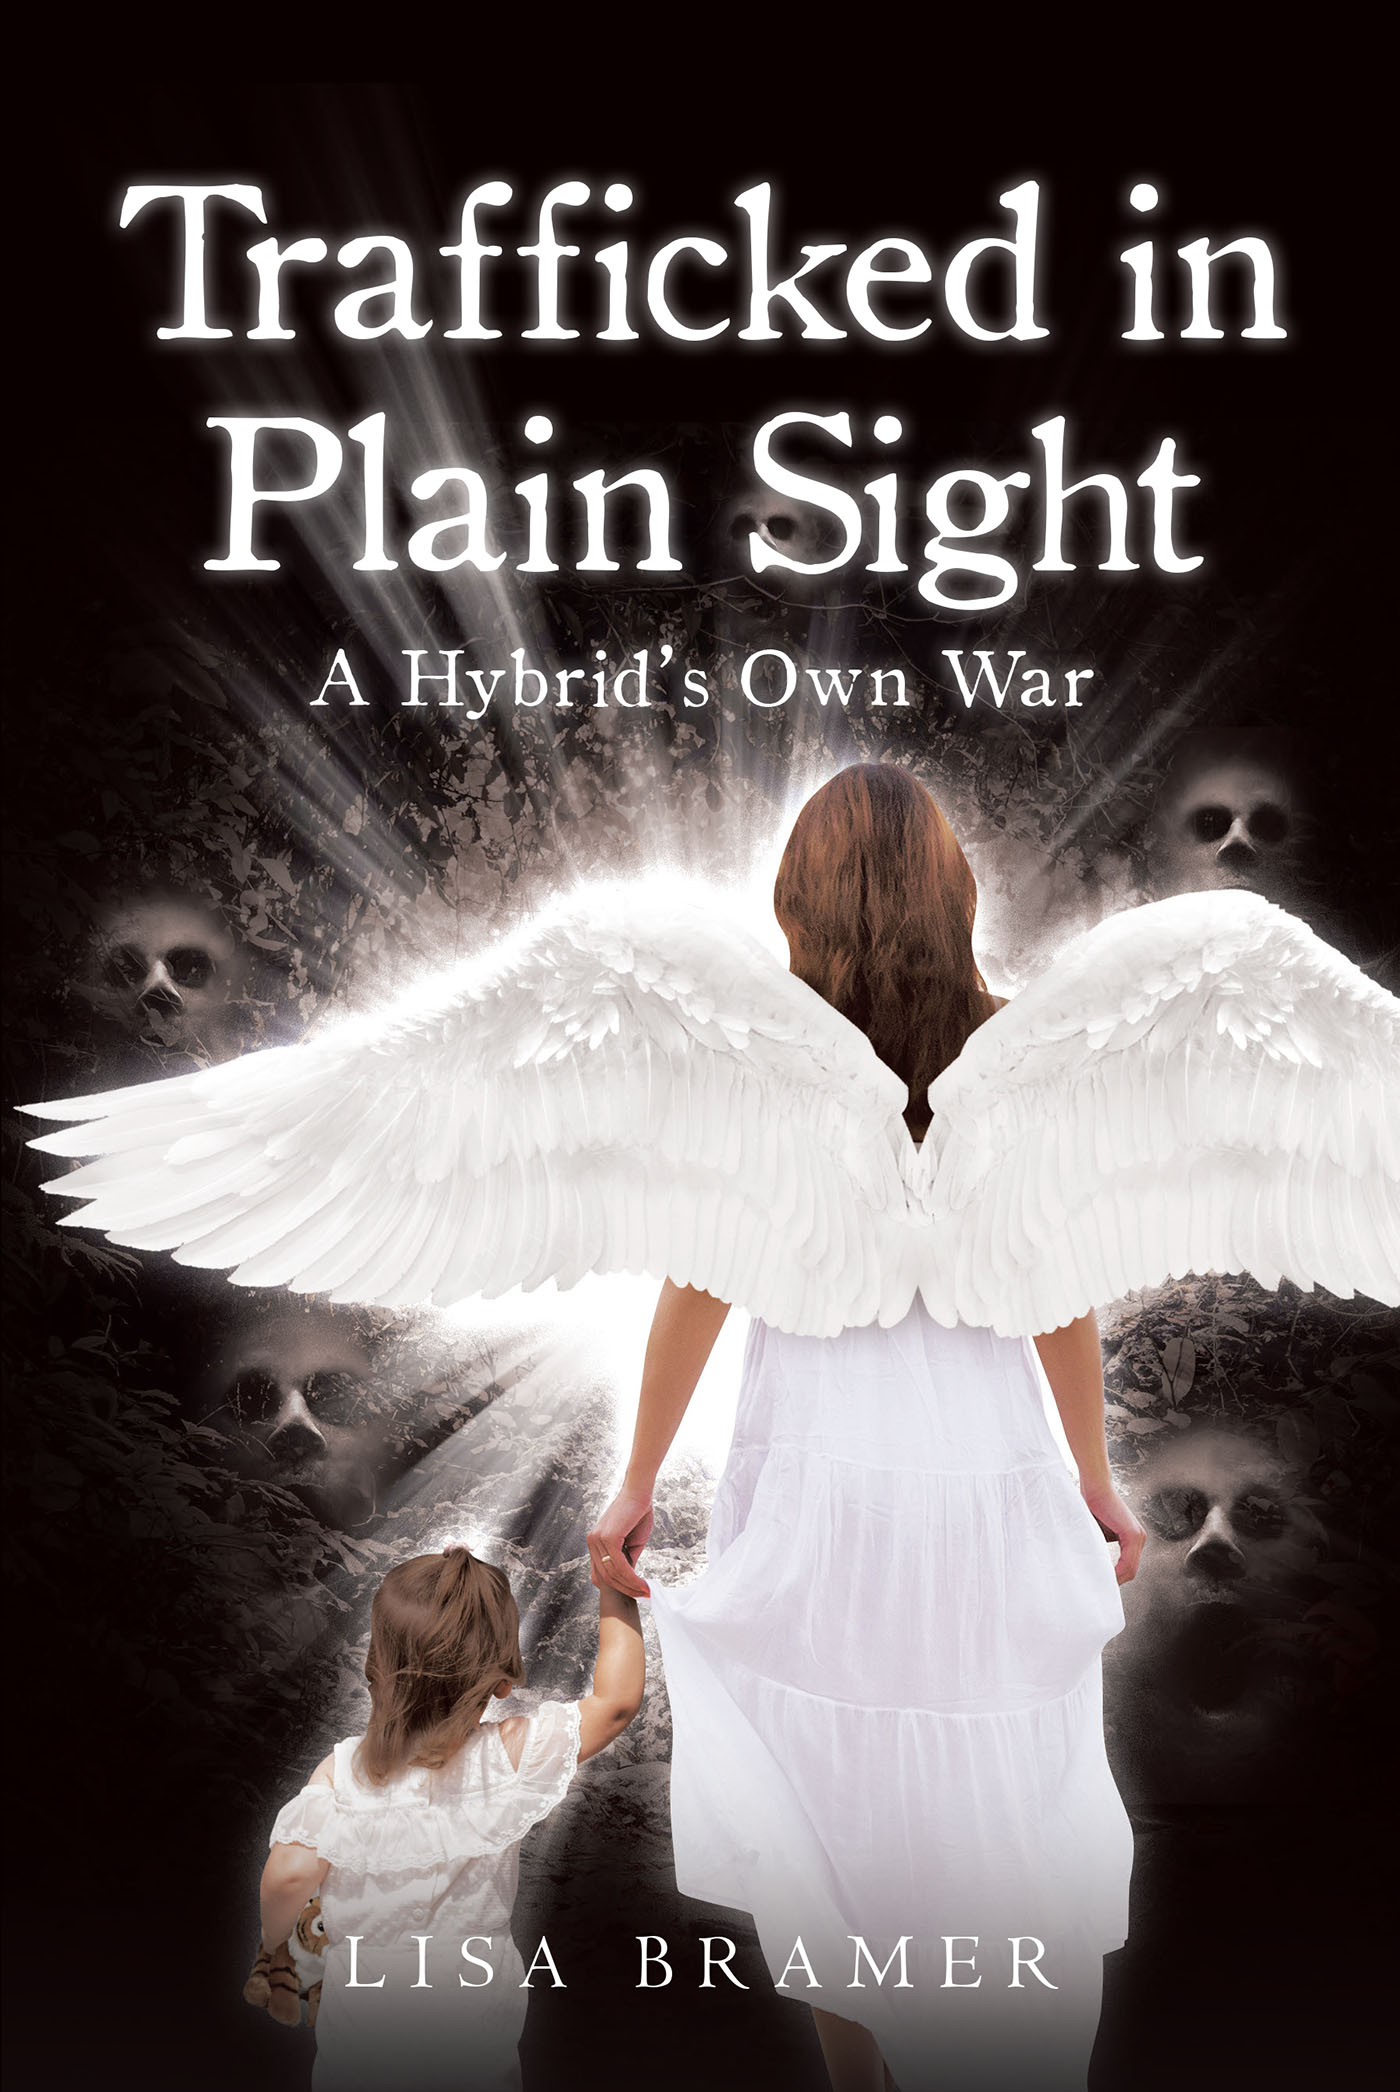 Author Lisa Bramer’s New Book “Trafficked in Plain Sight: A Hybrid's Own War” is a Powerful True Story of Learning to Overcome Trauma in All Its Forms